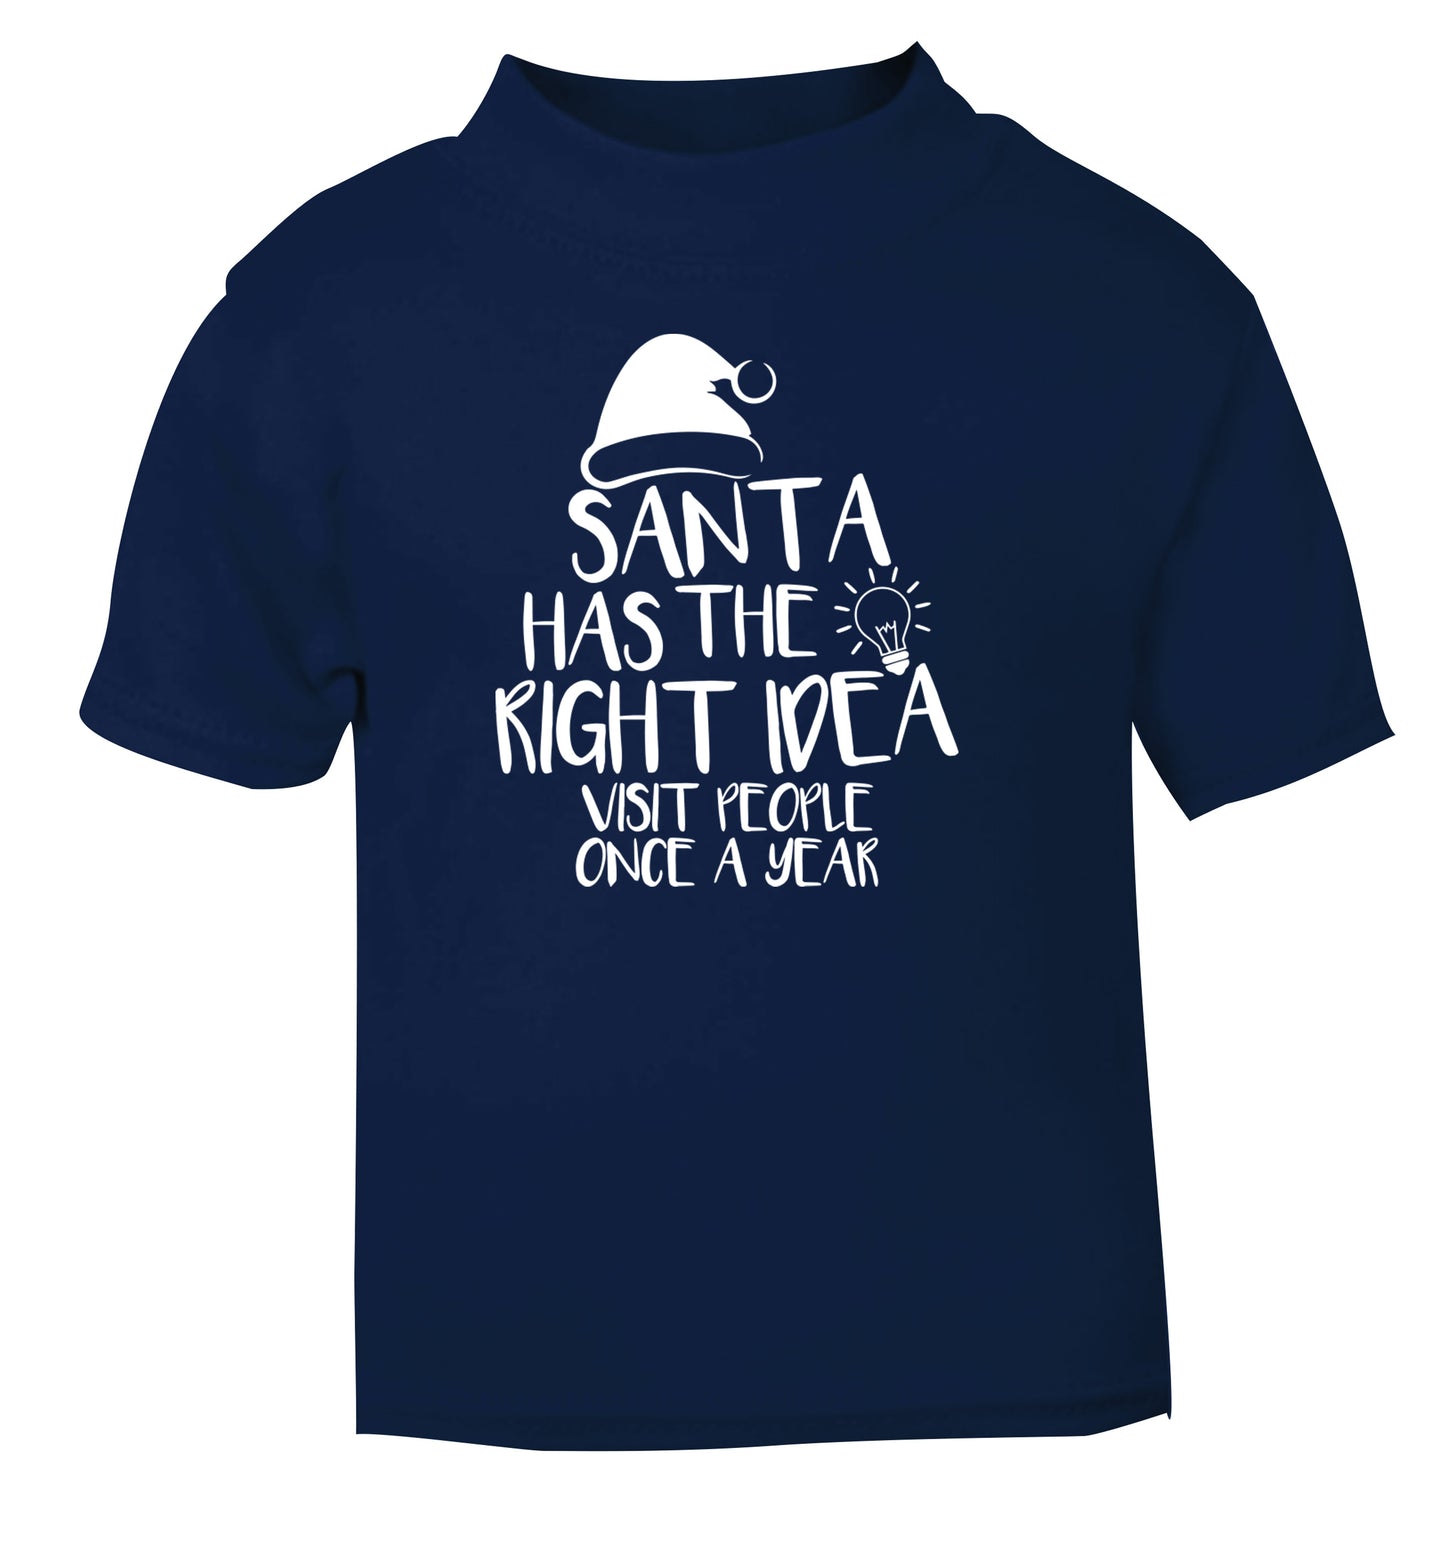 Santa has the right idea visit people once a year navy Baby Toddler Tshirt 2 Years